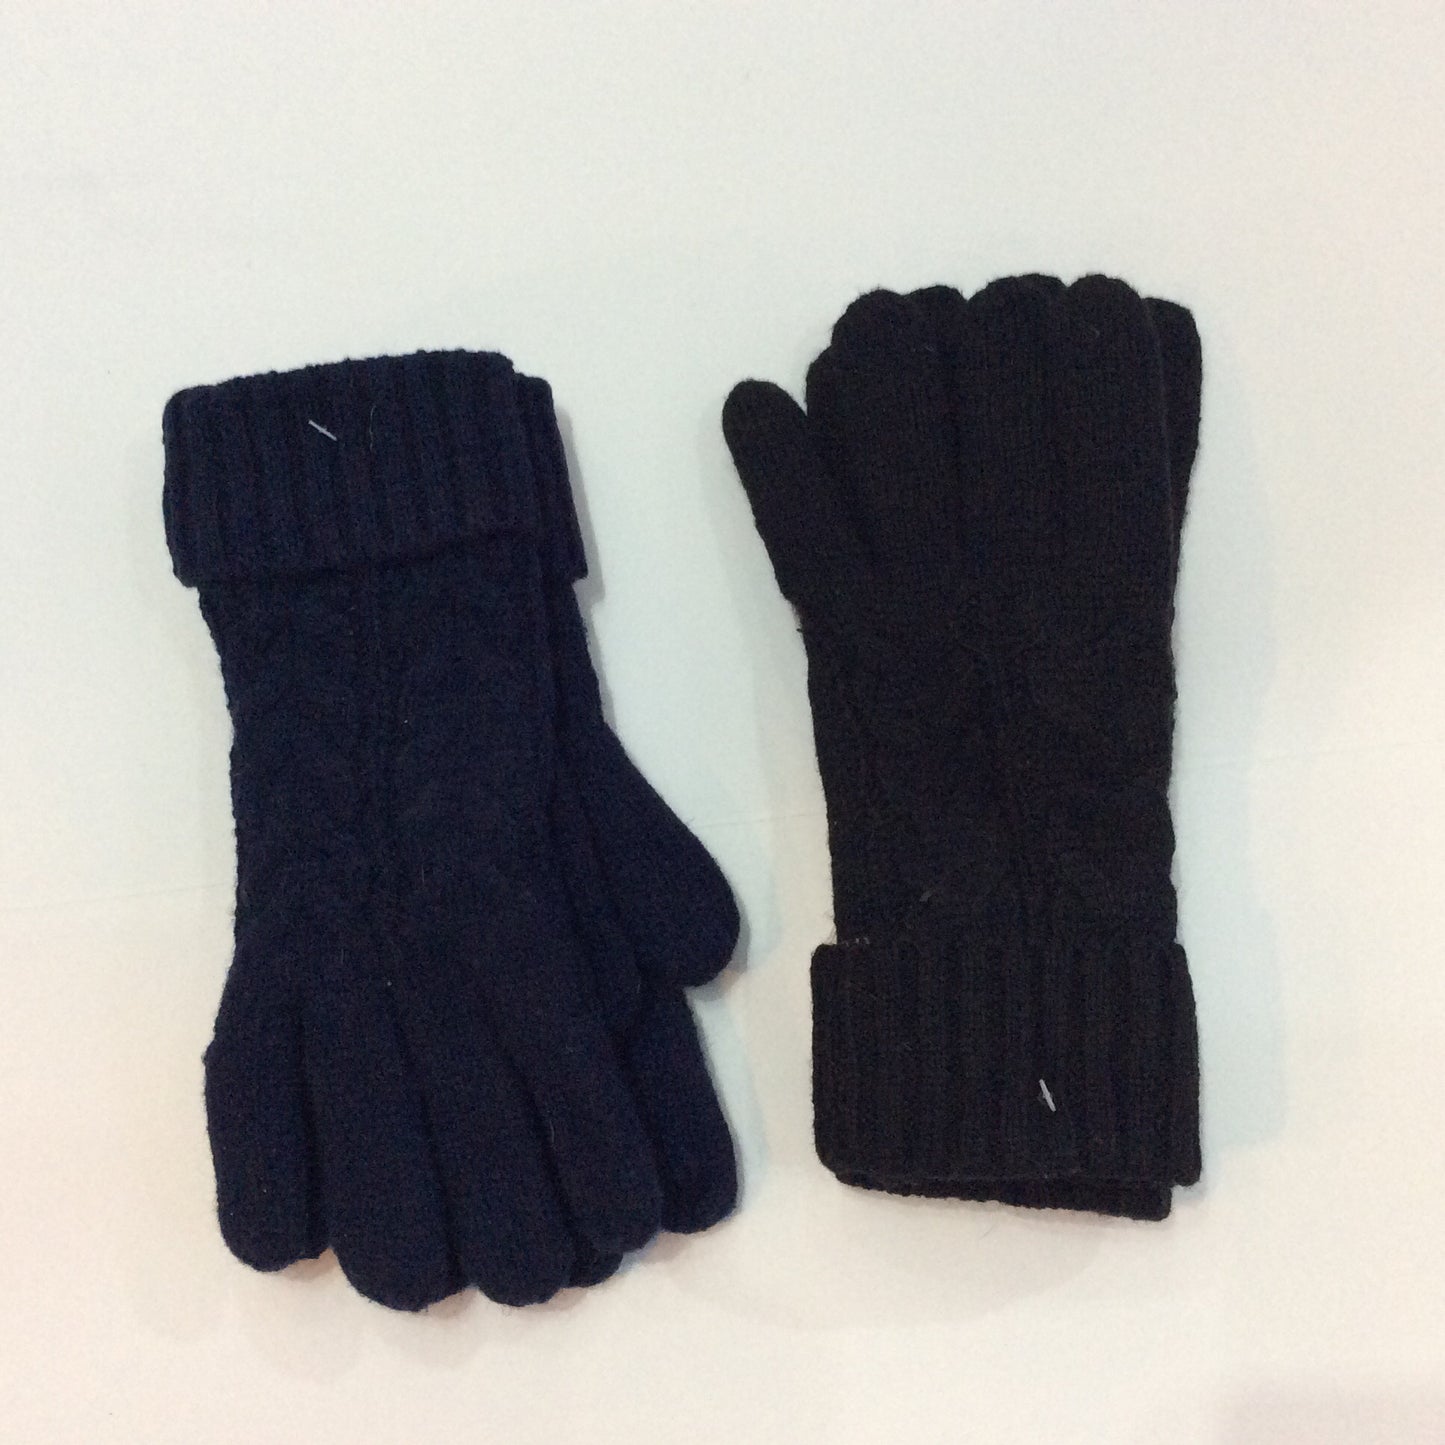 2 cable knit glove